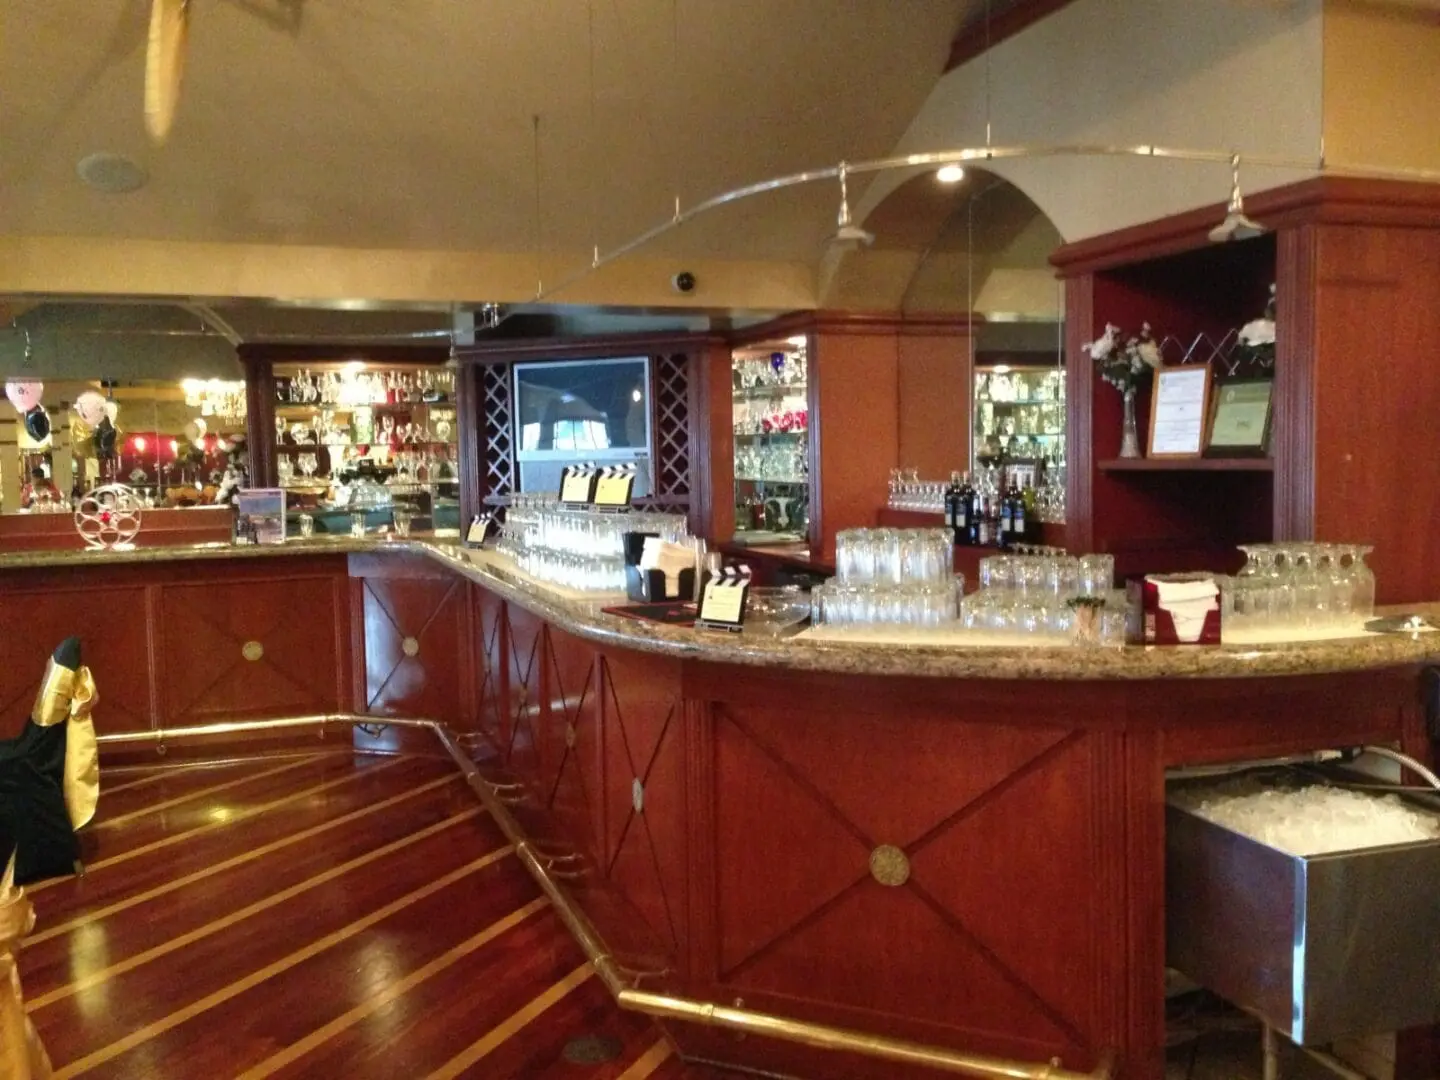 A bar with many wooden cabinets and counters